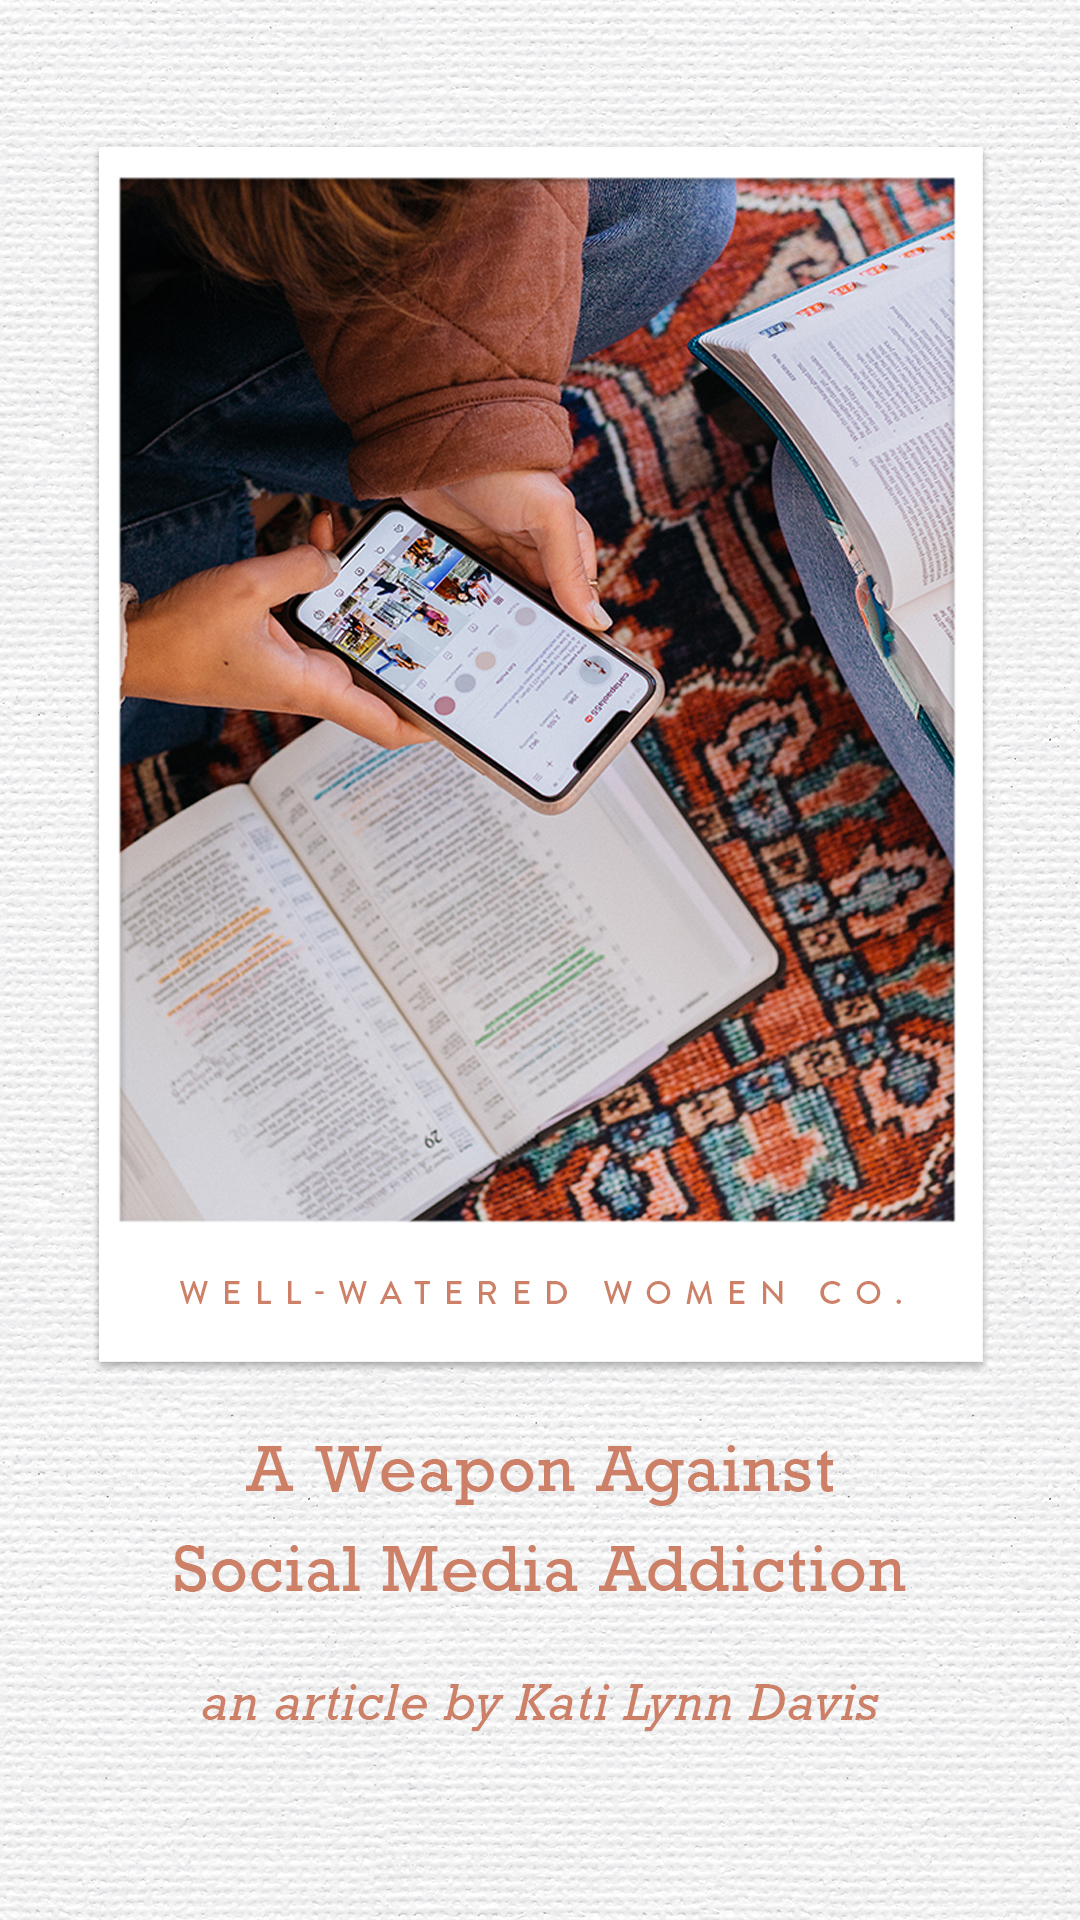 A Weapon Against Social Media Addiction-an Article from Well-Watered Women